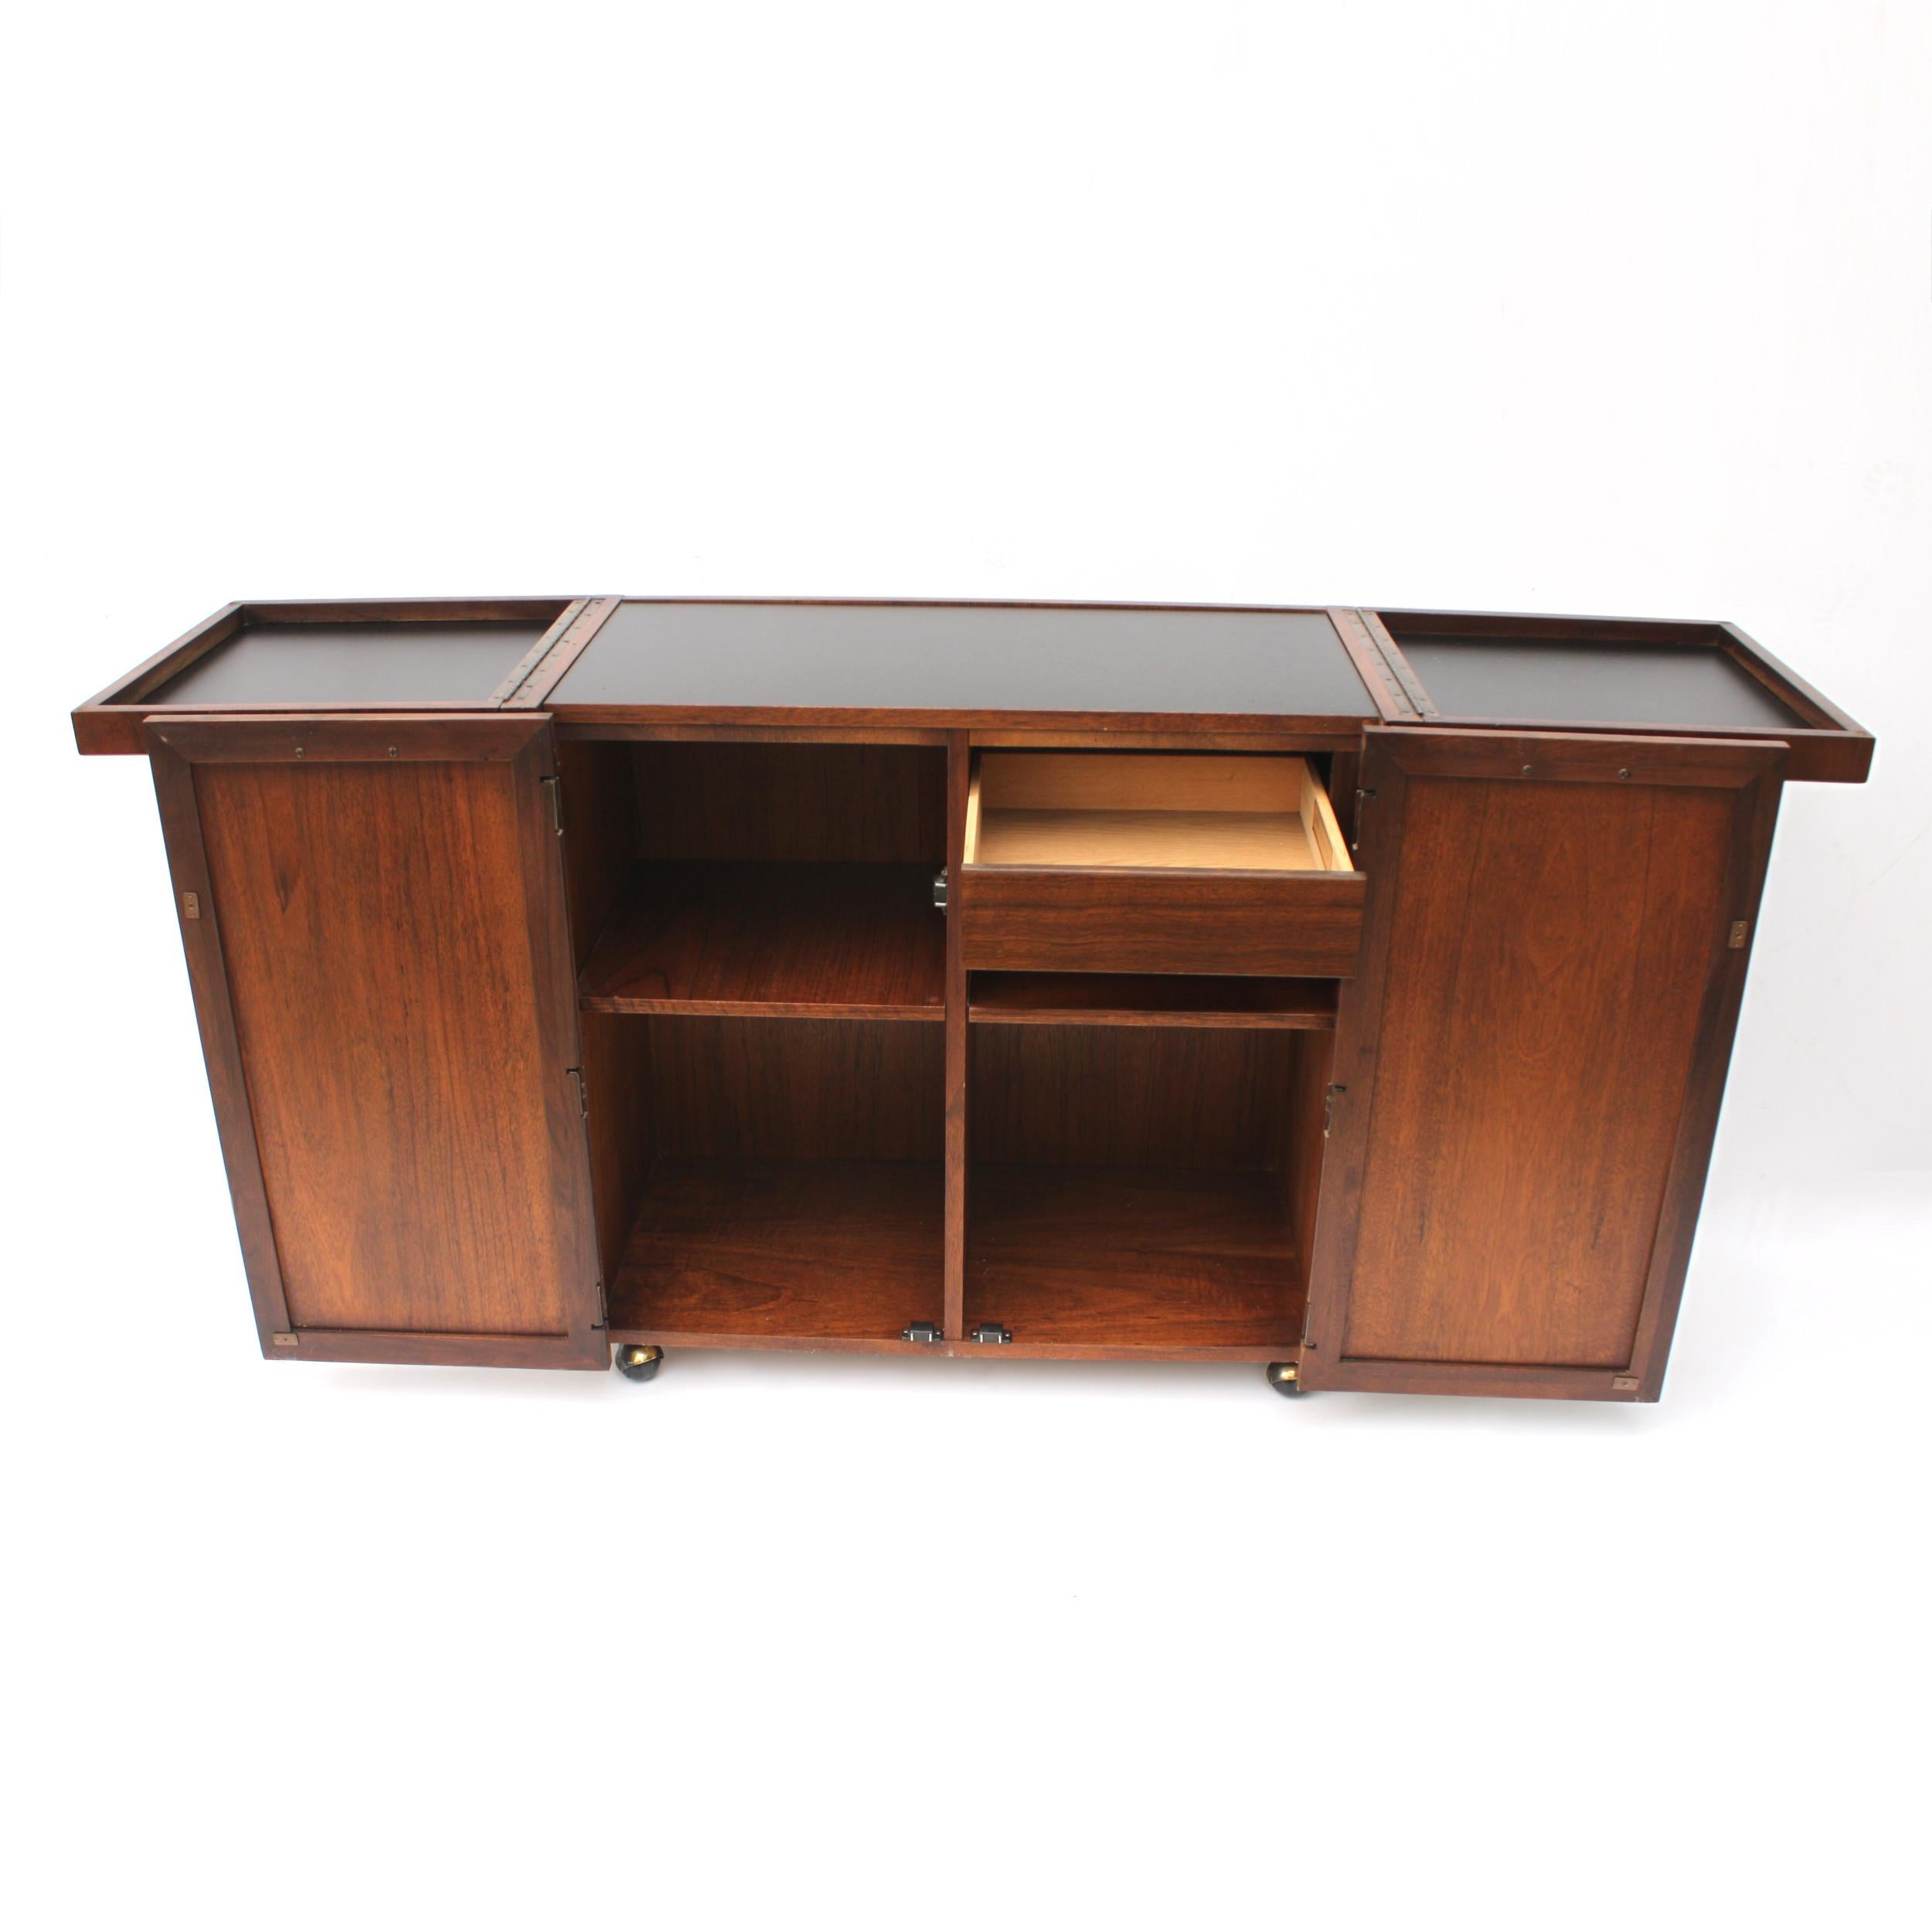 Late 20th Century Mid-Century Modern Rosewood Bar Serving Cart by Jack Cartwright for Founders